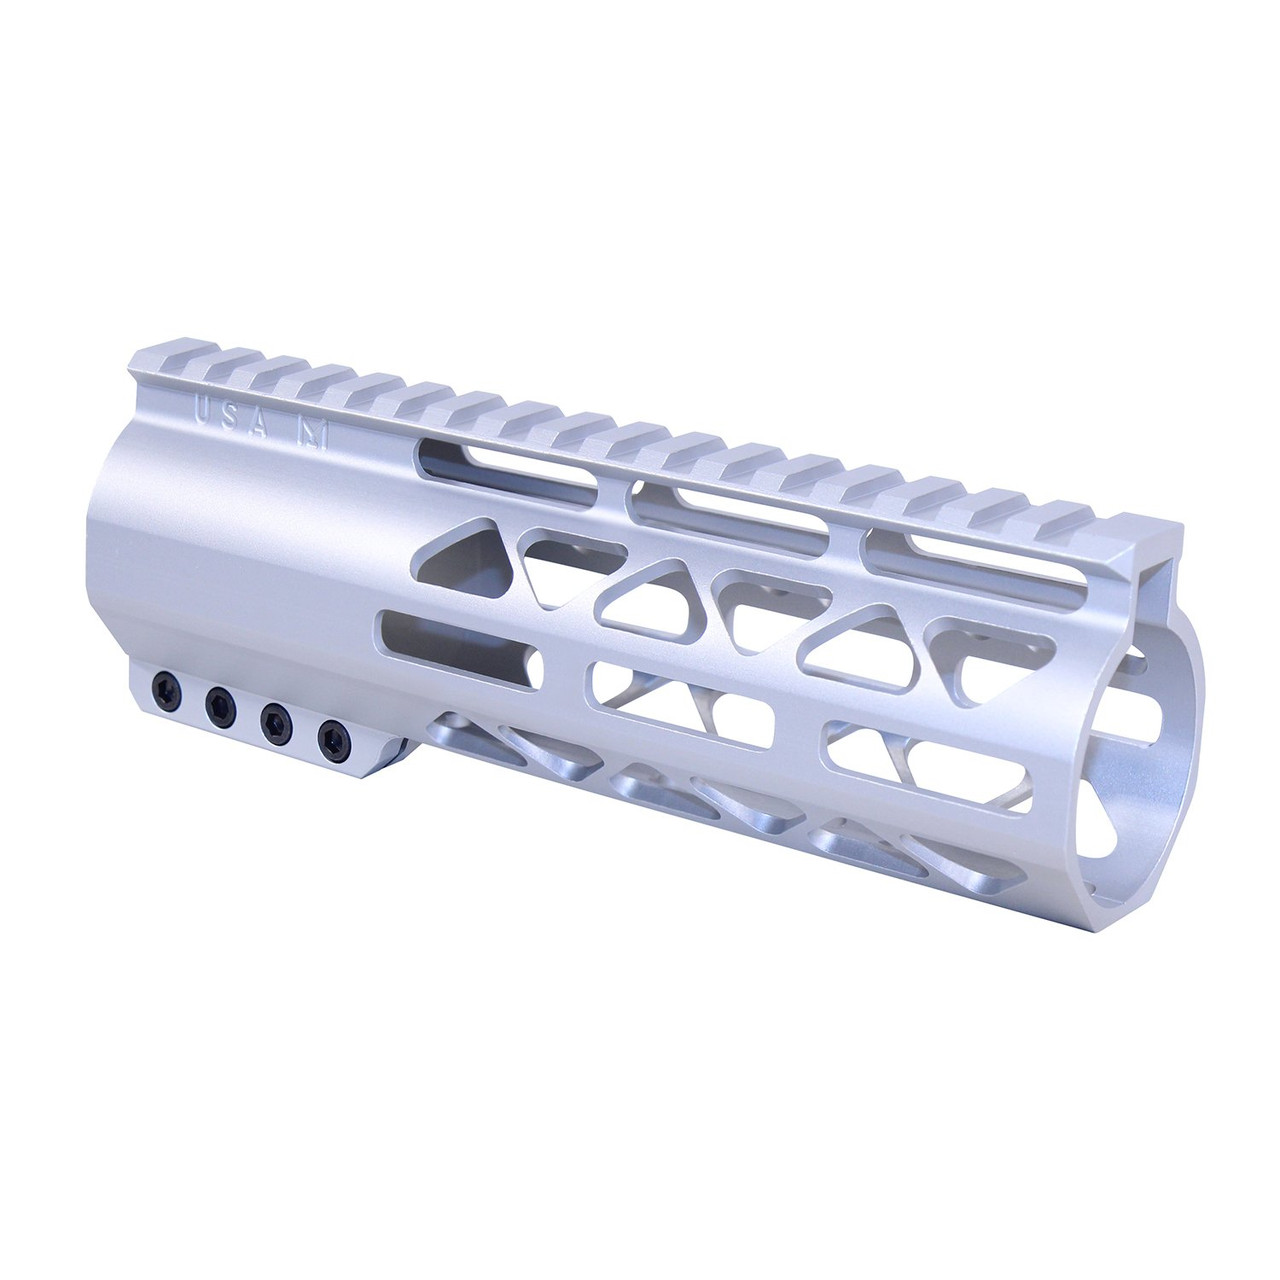 Guntec USA GT-7ALC-308-CLEAR 7" AIR-LOK Series M-LOK Compression Free Floating Handguard With Monolithic Top Rail (.308 Cal) (Anodized Clear)